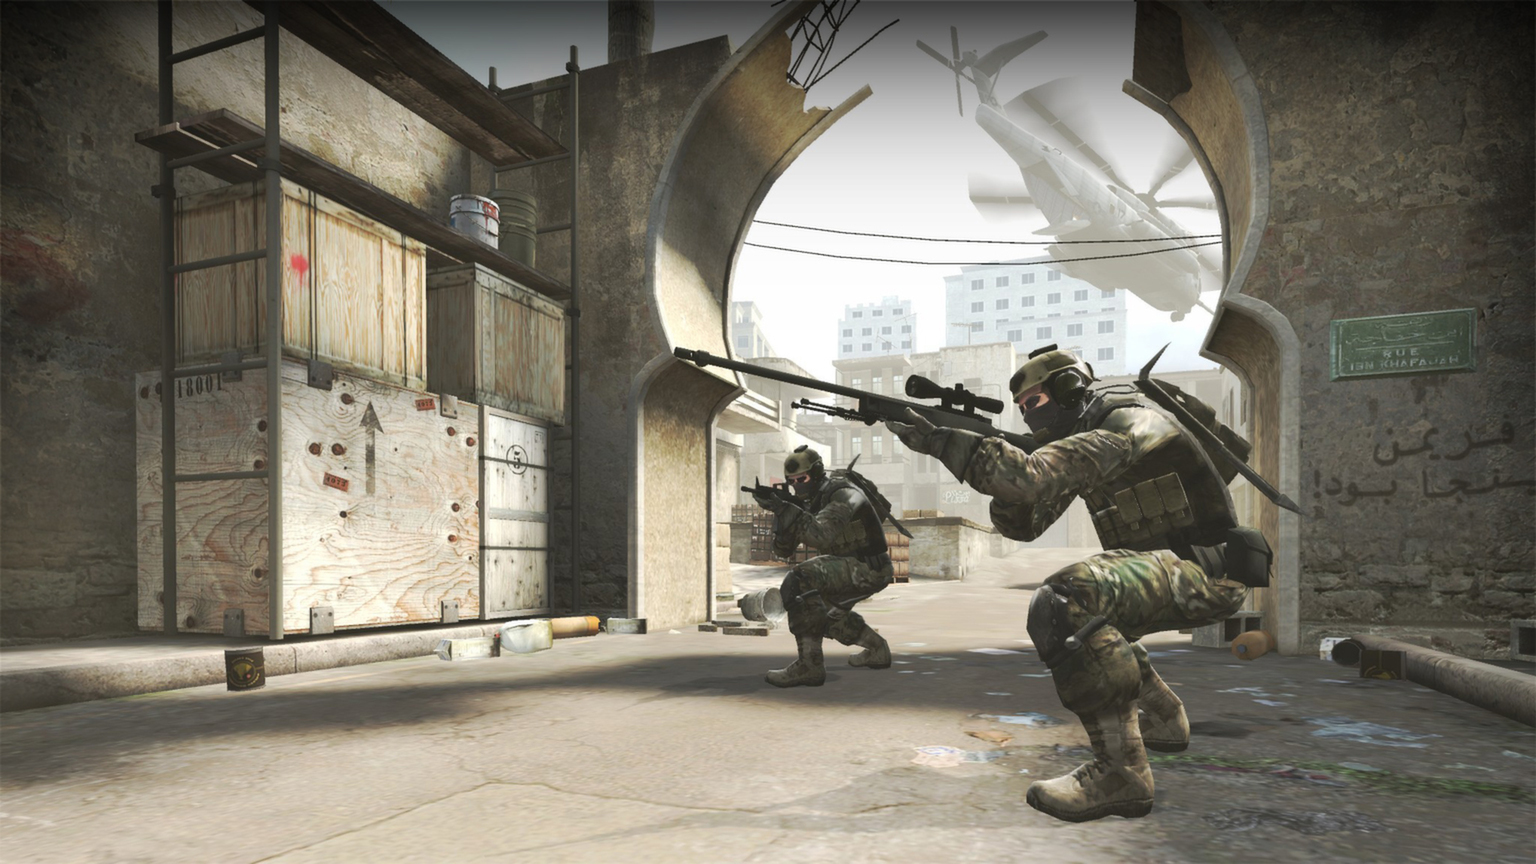 Call of Duty Modern Warfare 2 Becomes the Most Played Game on Steam Leaving  Behind Counter-Strike and Dota 2